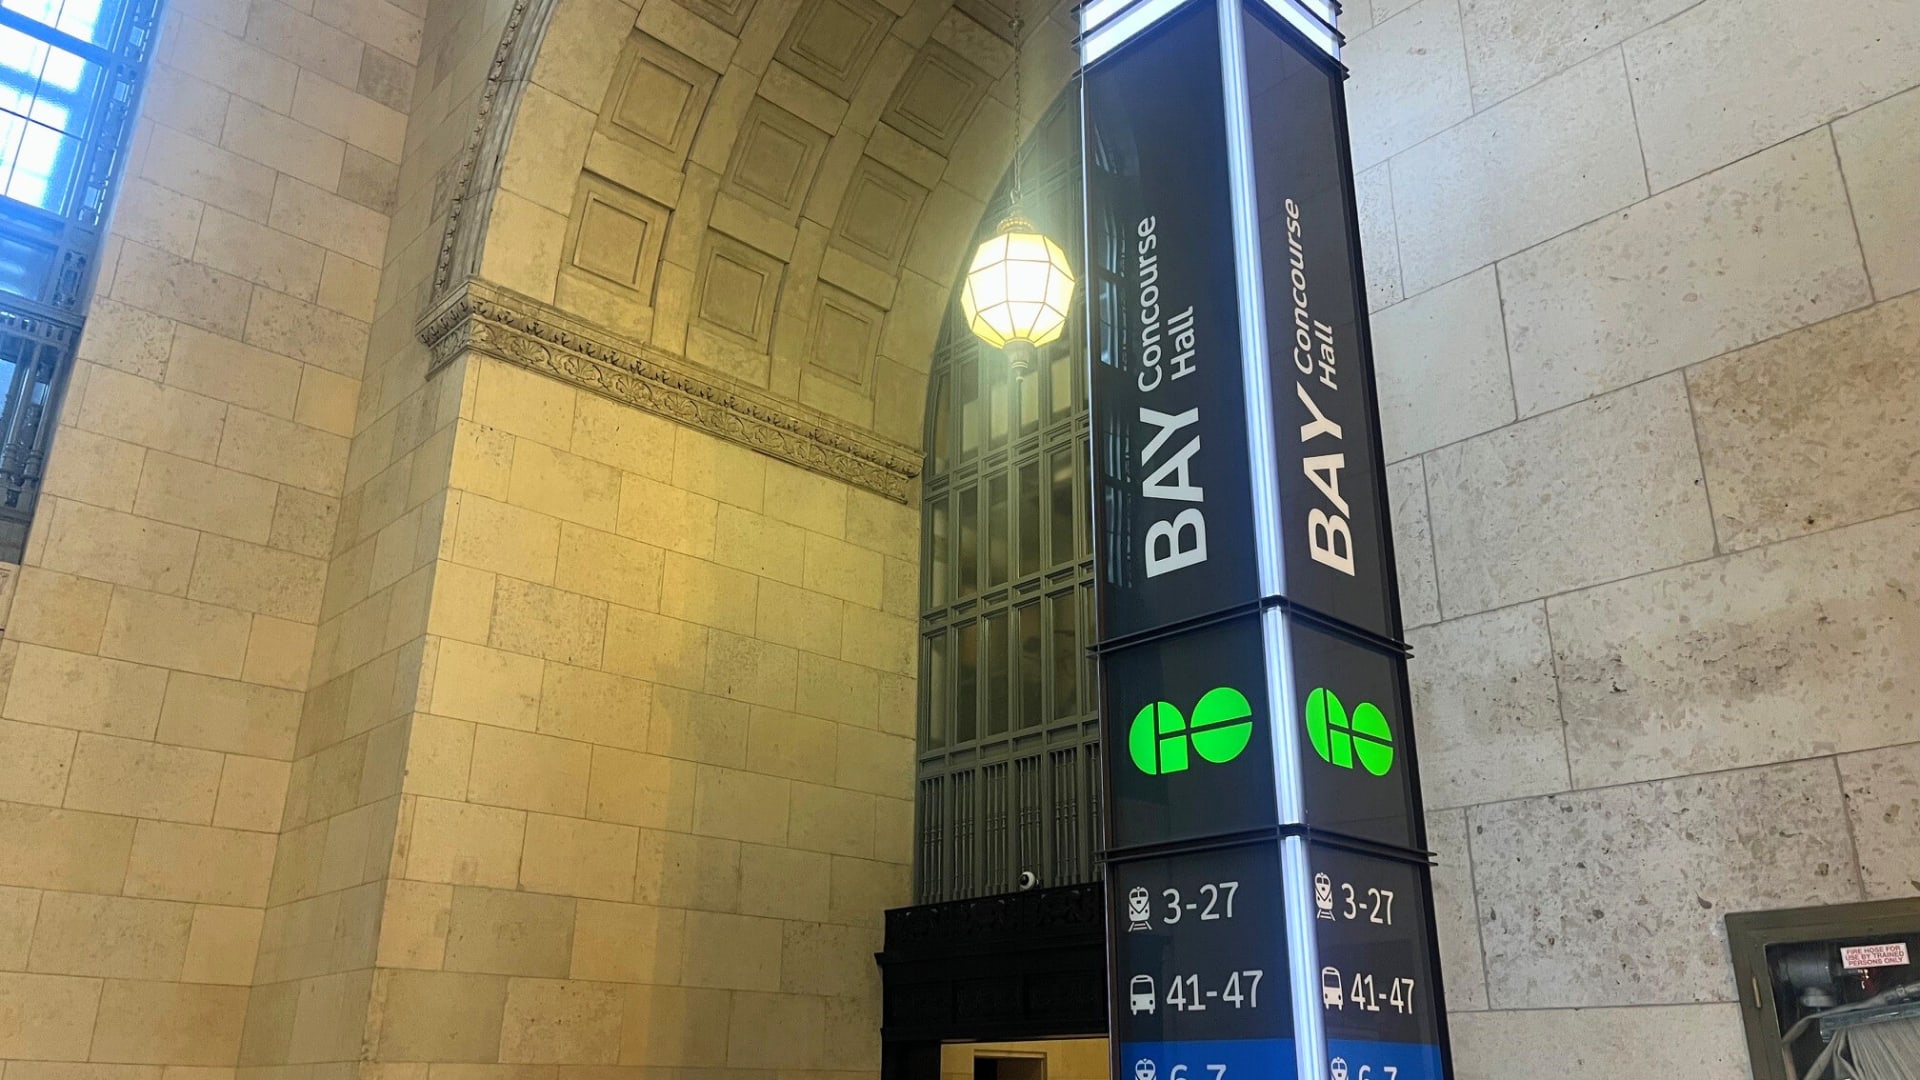 Sign labelled "Bay Concourse" in Great Hall